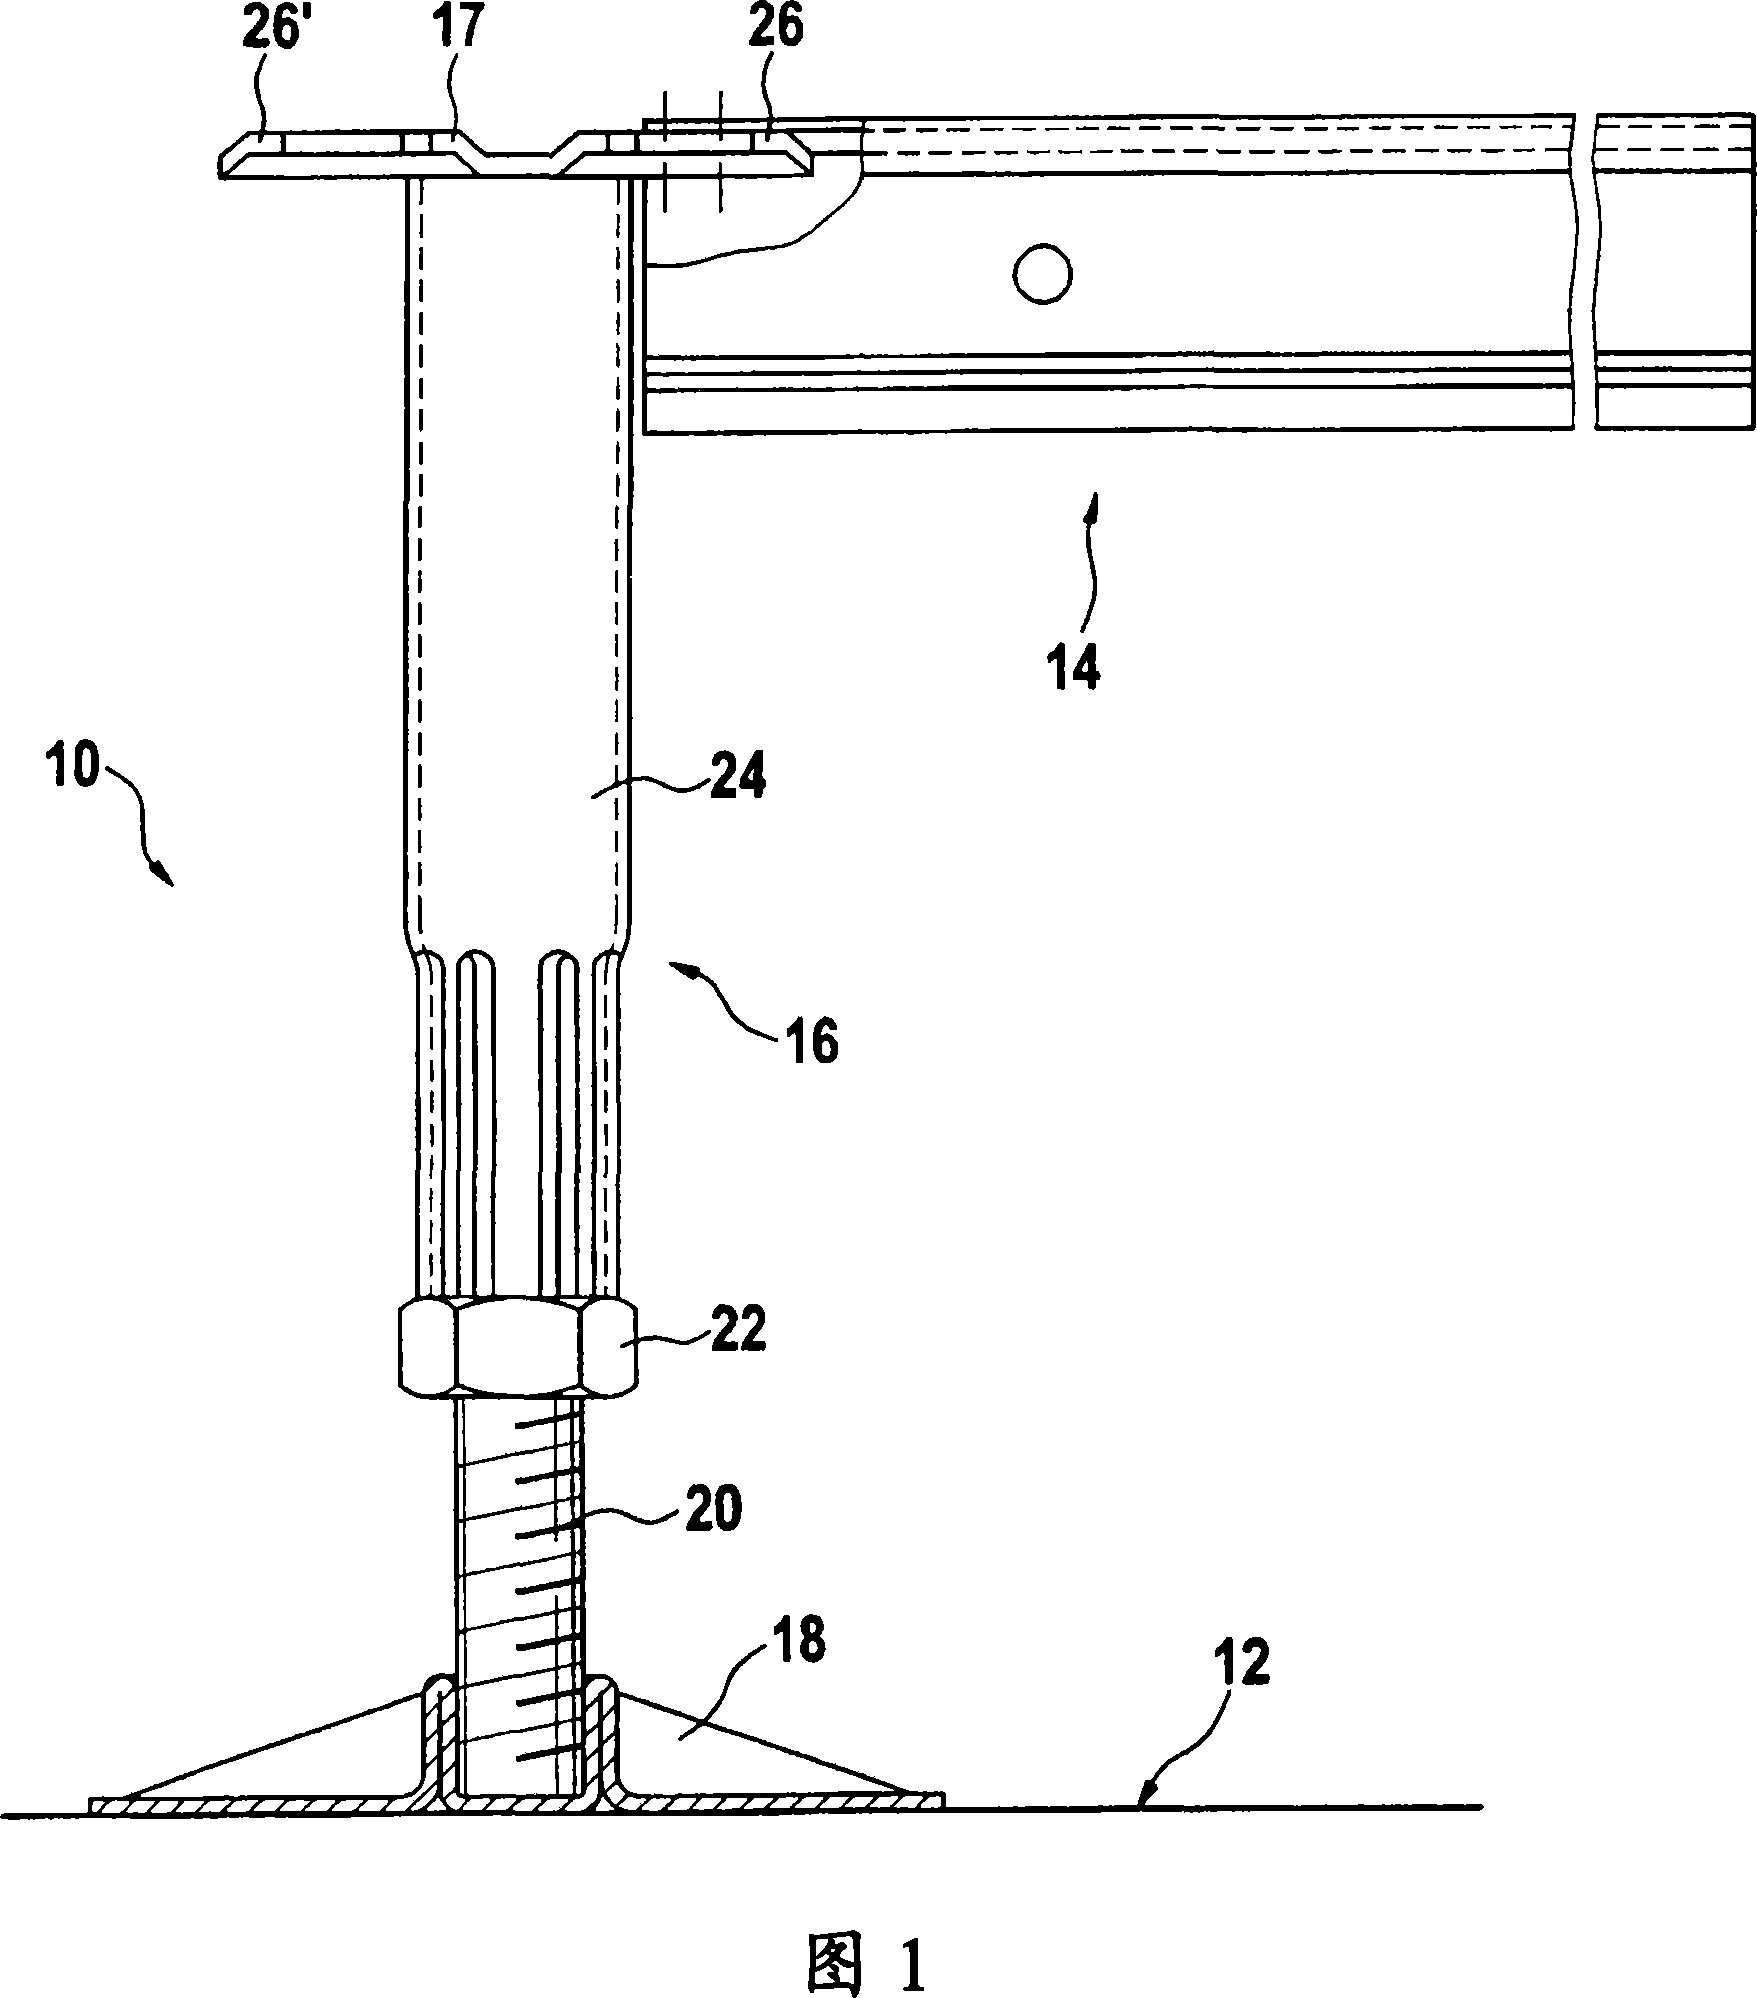 Support structure for elevated floor assembly